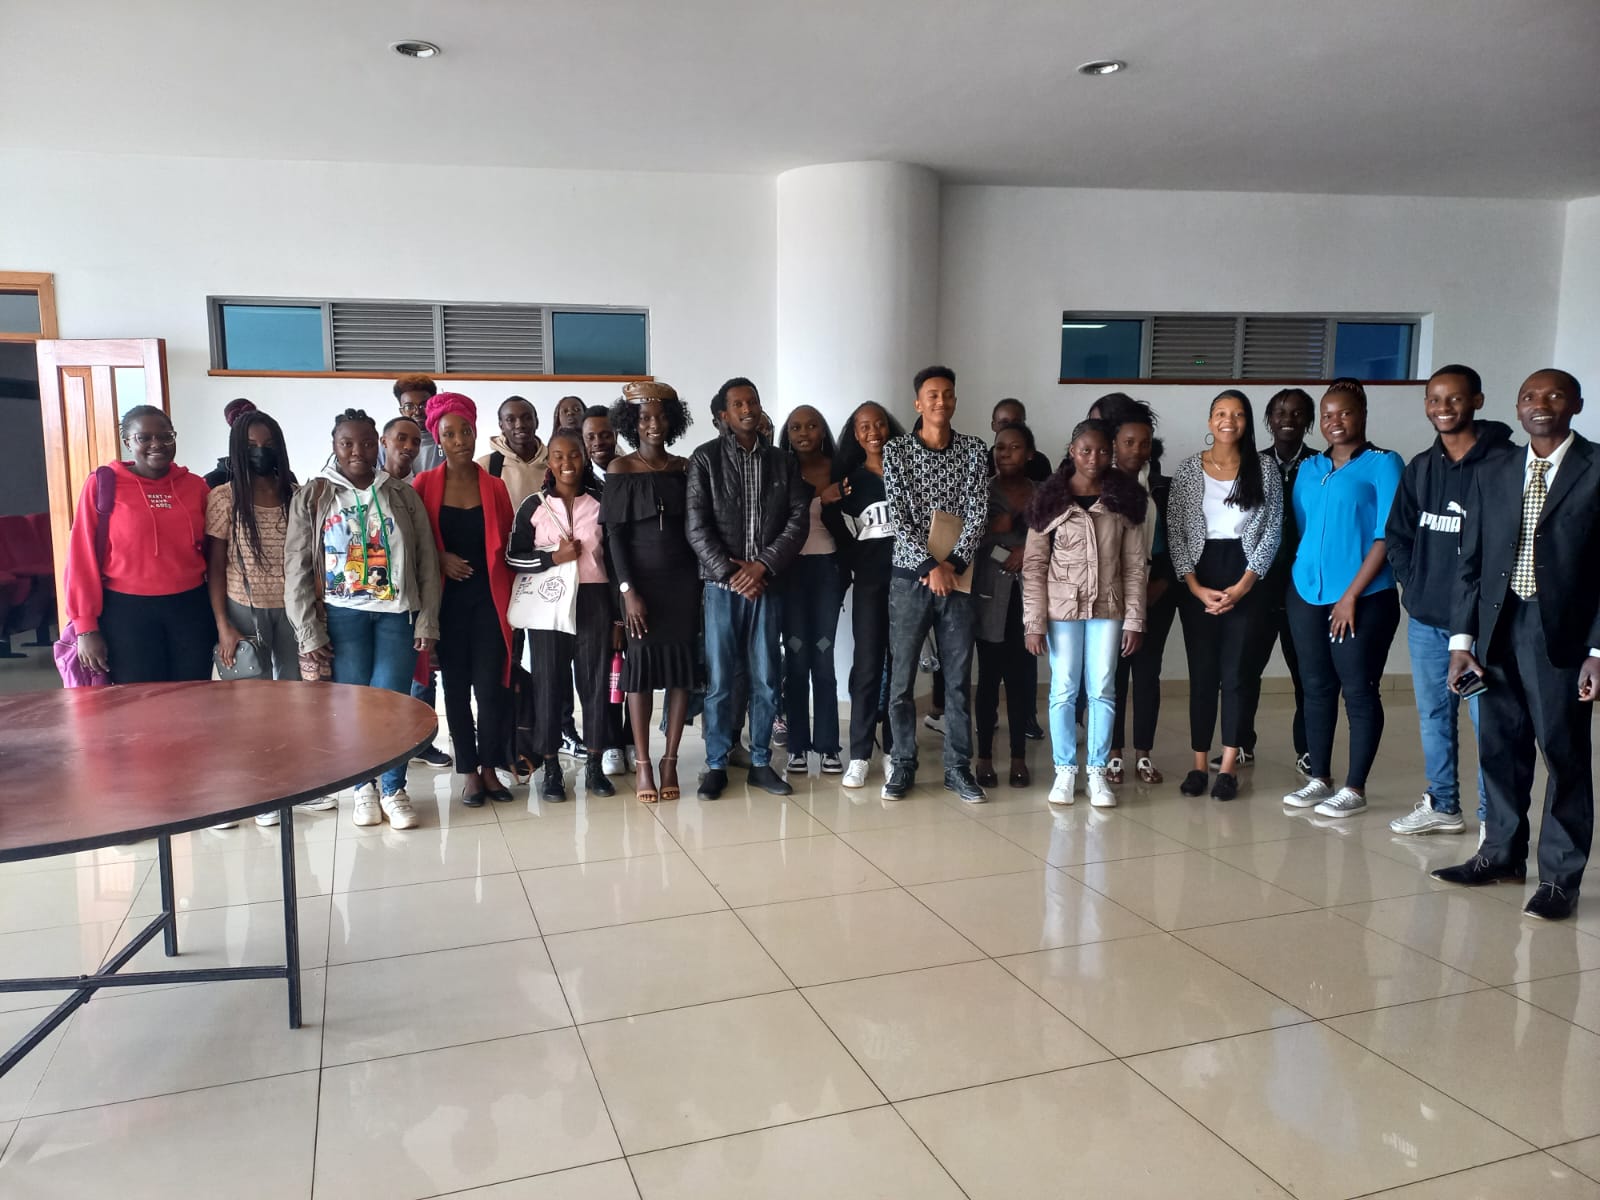  The Educational and Linguistic Officer at the French Embassy in Kenya met the University of Nairobi students from the Department of Literature